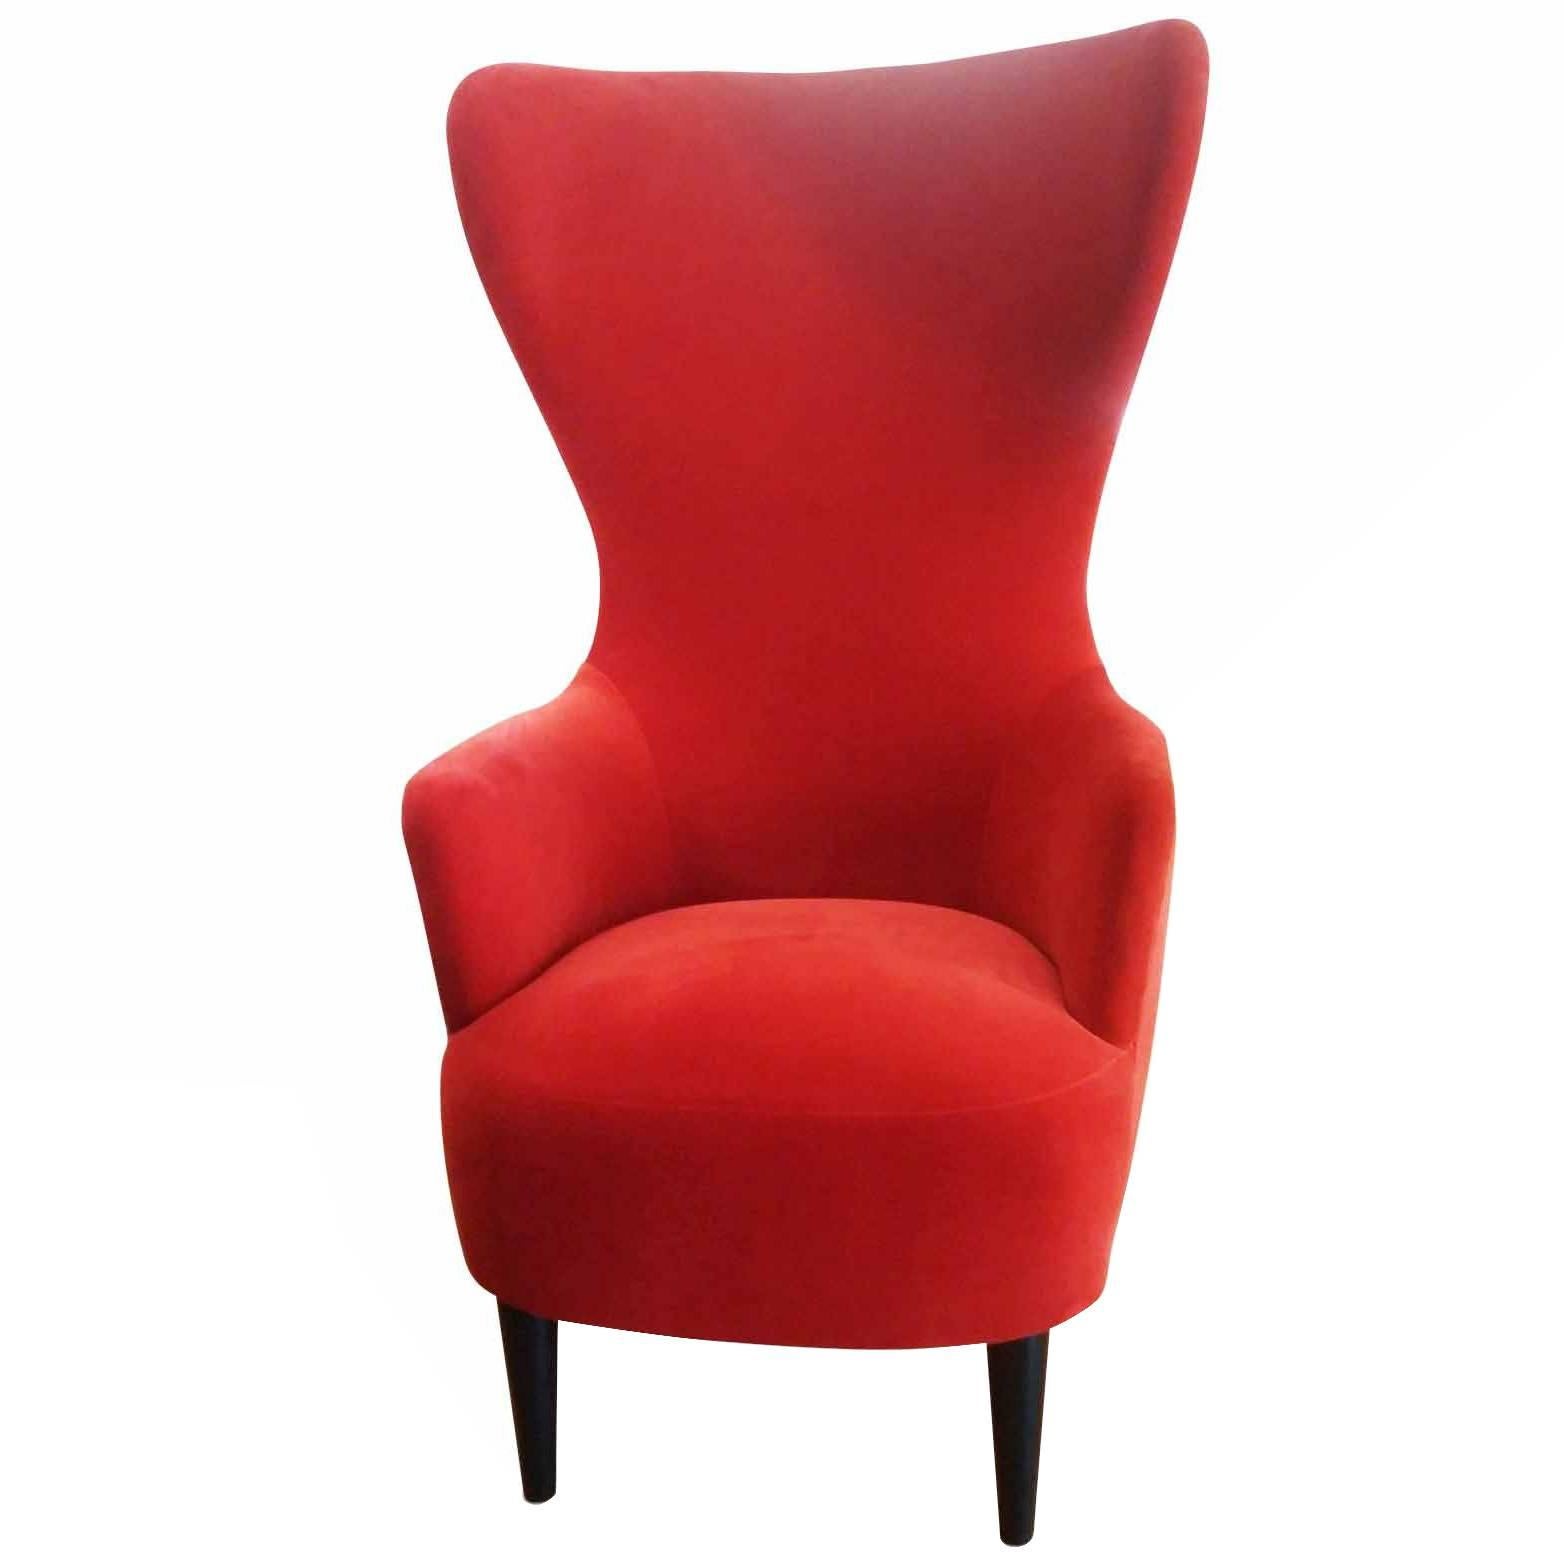 Armchair “Wingback Chair” by Manufacturer Tom Dixon in Massive Wood and Velvet For Sale